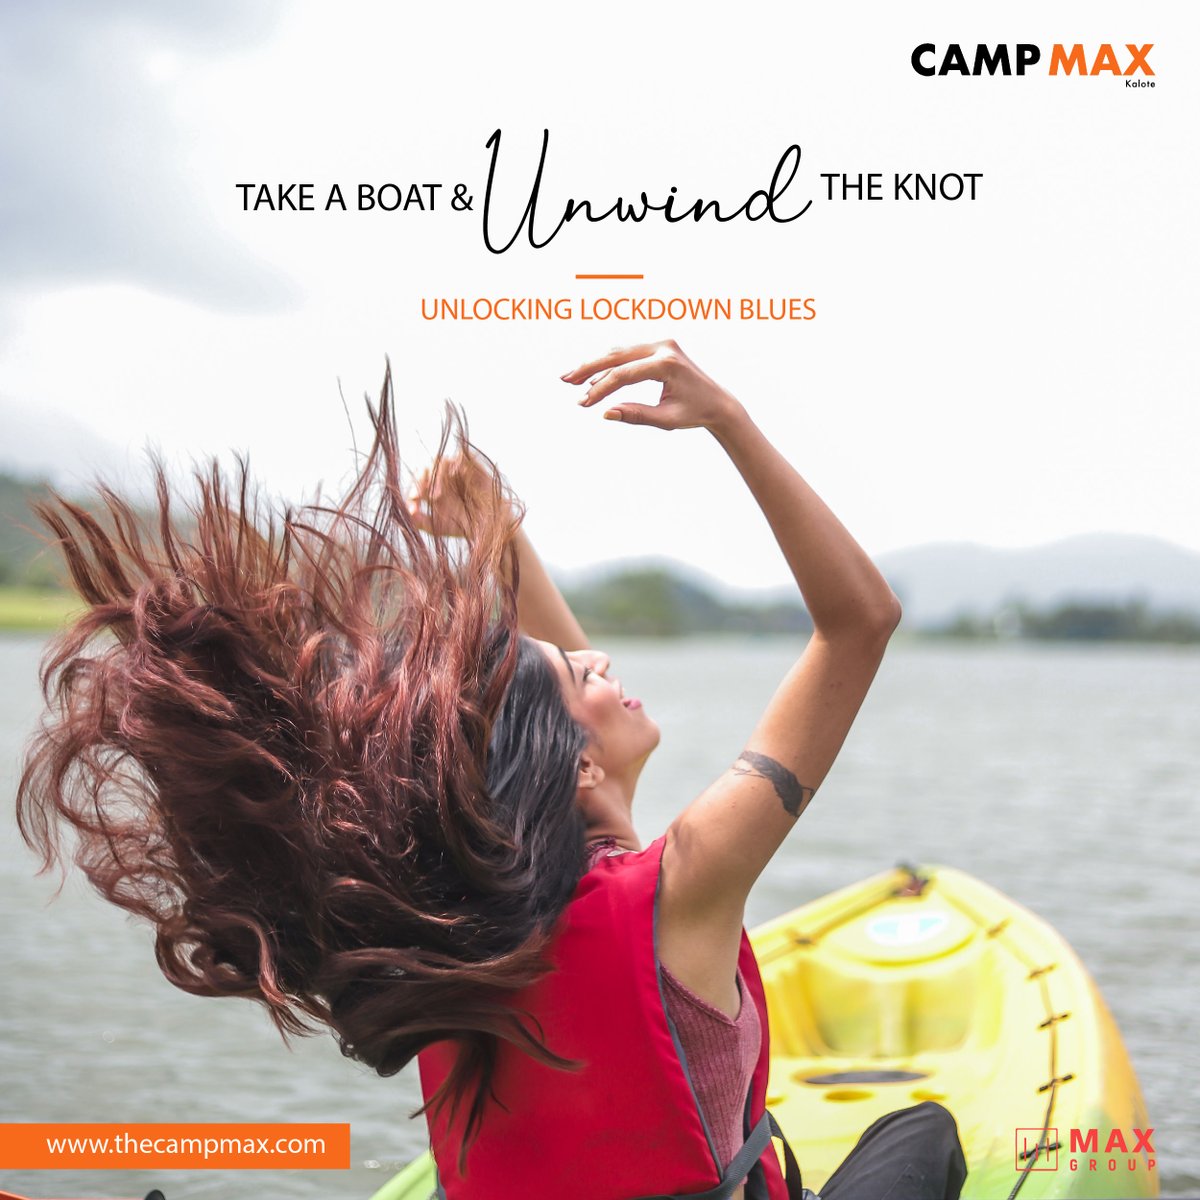 Lockdown was tough. But, being unable to find a place to unwind all the blues of lockdown is tougher. 
One and half hour away from Mumbai & Pune, Camp Max is the much needed solace for you.

Opening Soon
#camping #campmax #letsgocamping #lockdownblues #unwind #unleashyourenergy